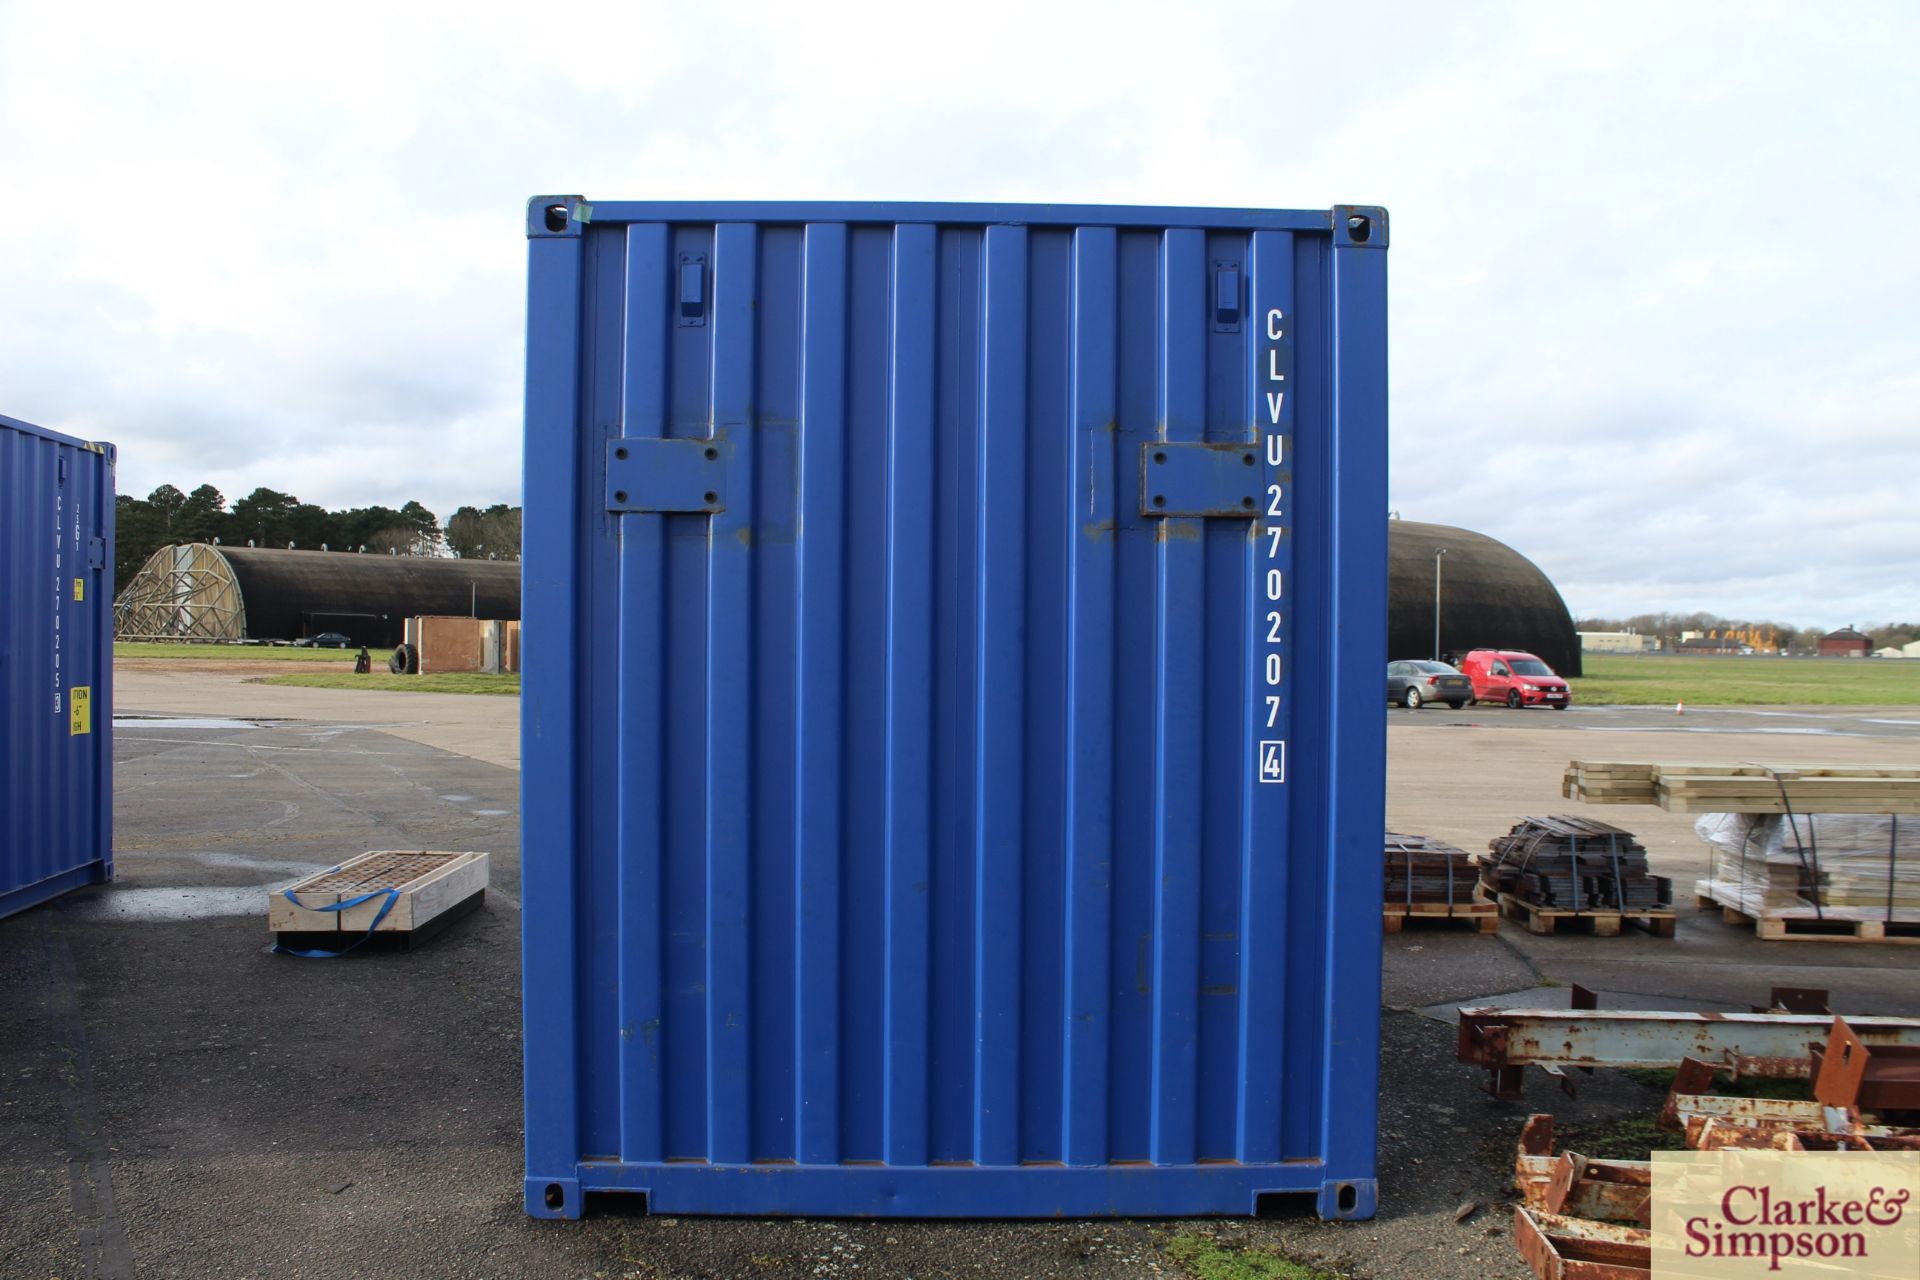 20ft x 9ft6in high shipping container. 2019. Partially reinforced to interior to include plates - Image 5 of 19